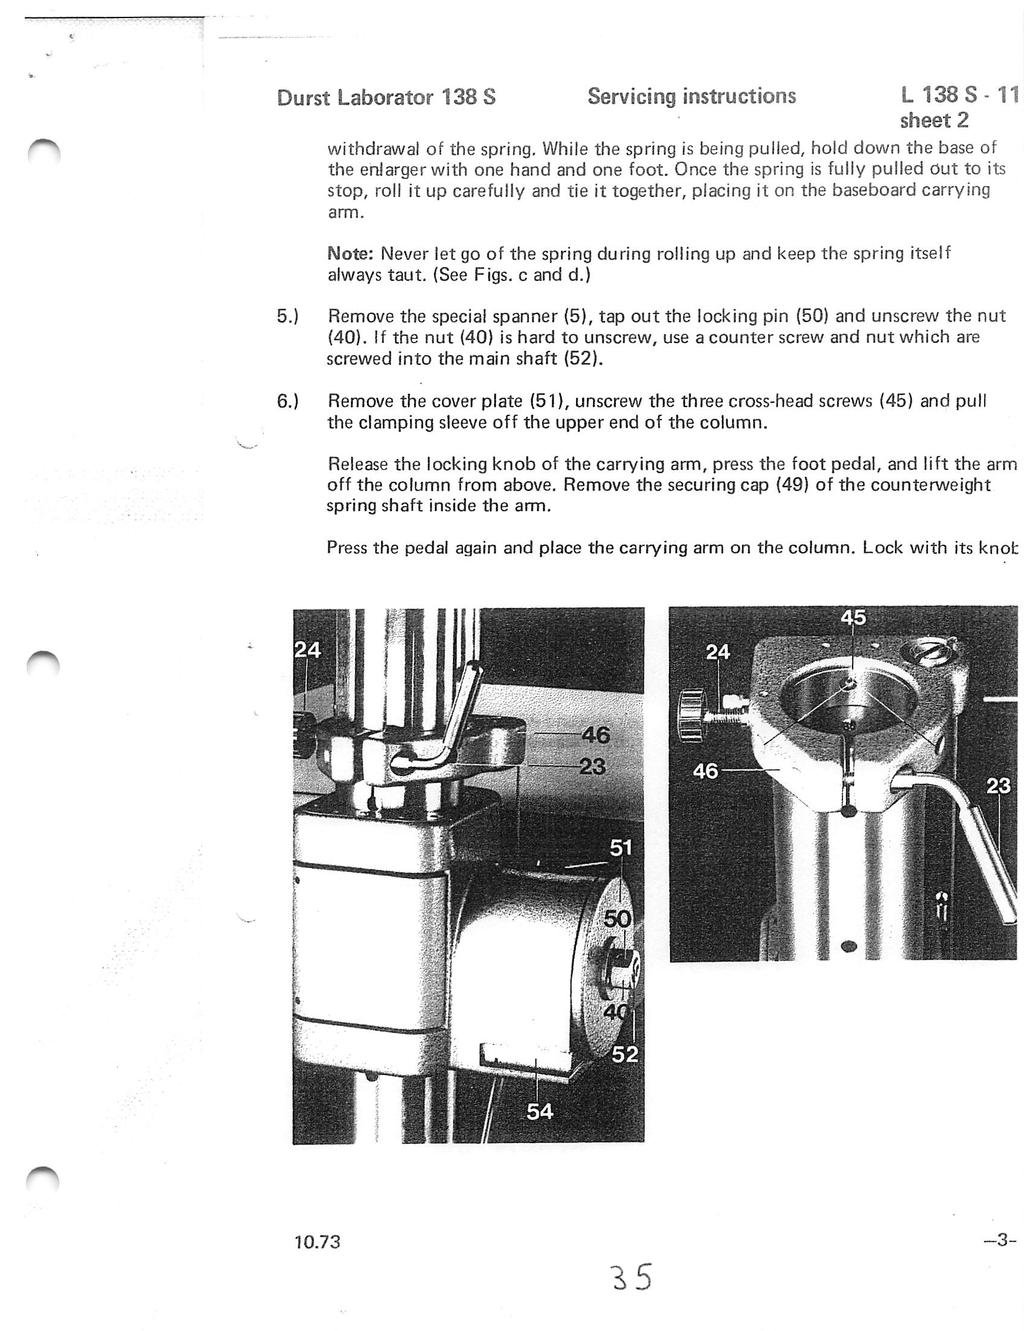 Durst Laborator 138 S Servicing instructions L 1 3 8 S - 11 sheet 2 withdrawal of the spring. While the spring is being pulled, hold down the base of the enlargerwith one hand and one foot.